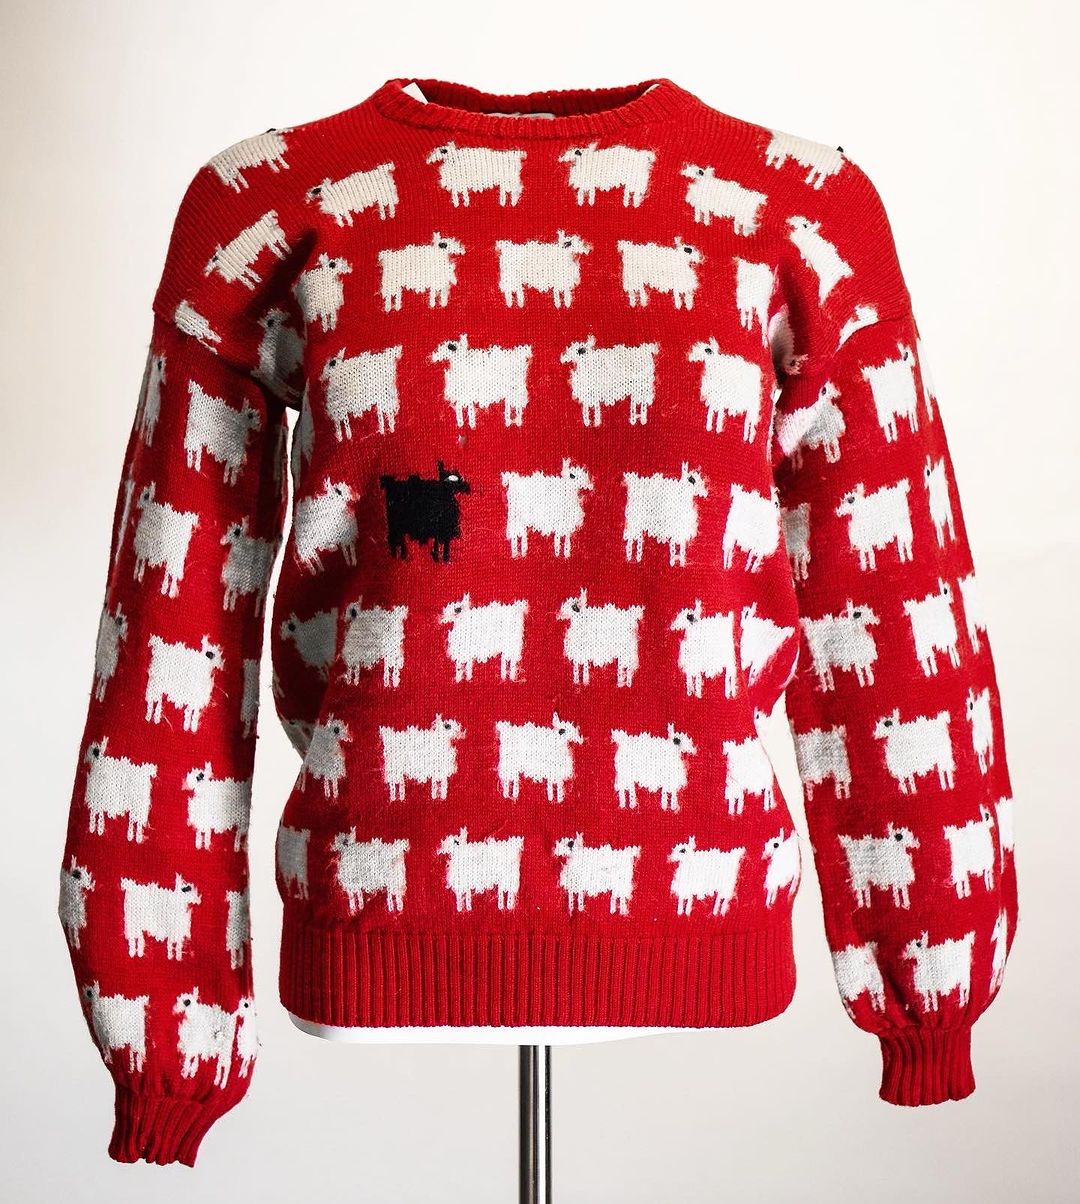 The Black Sheep sweater from Warm & Wonderful